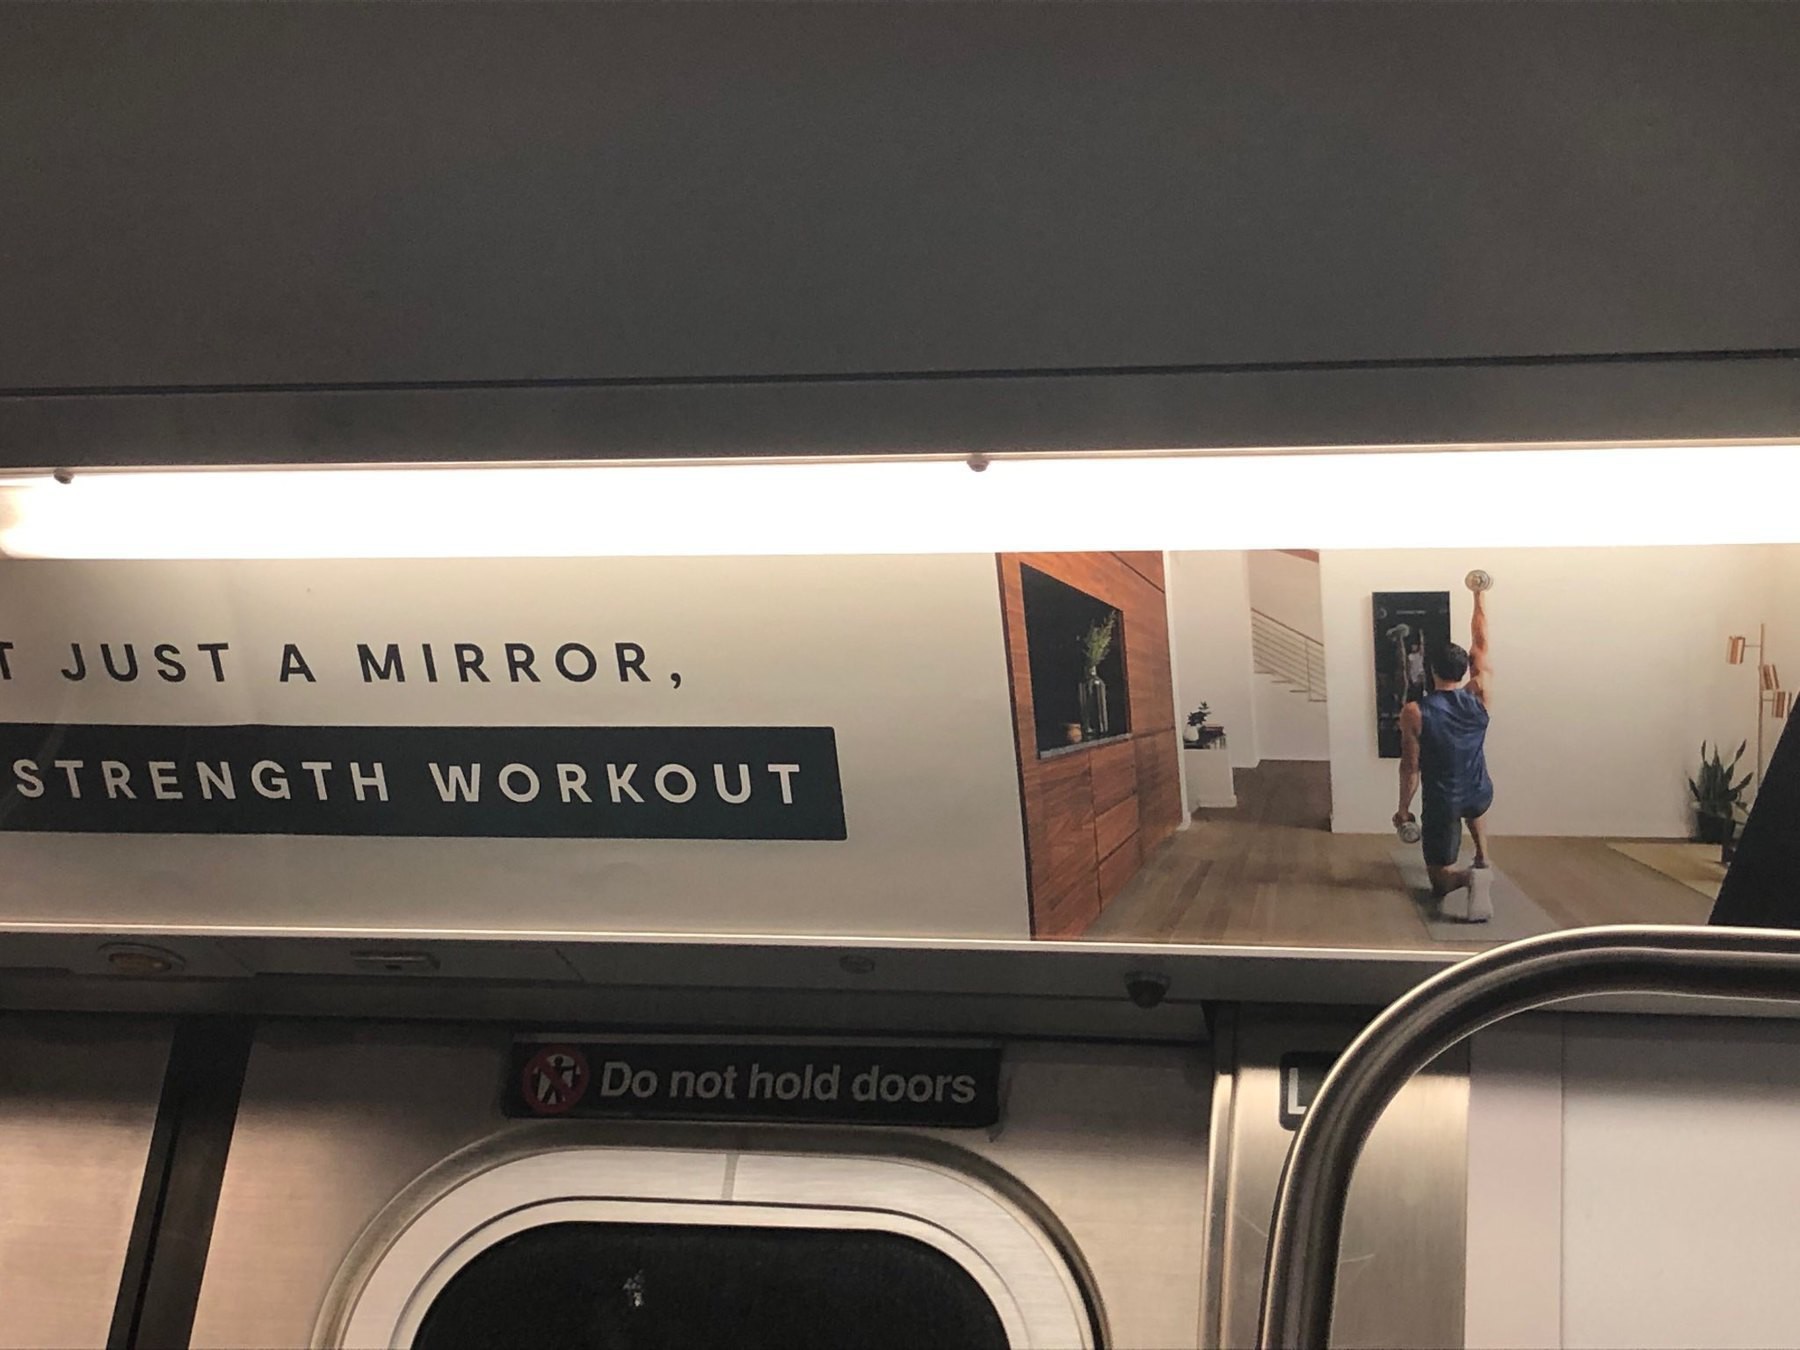 Subway add for a "Mirror" (TM). Apparently a giant smartphone for exercise at home. 